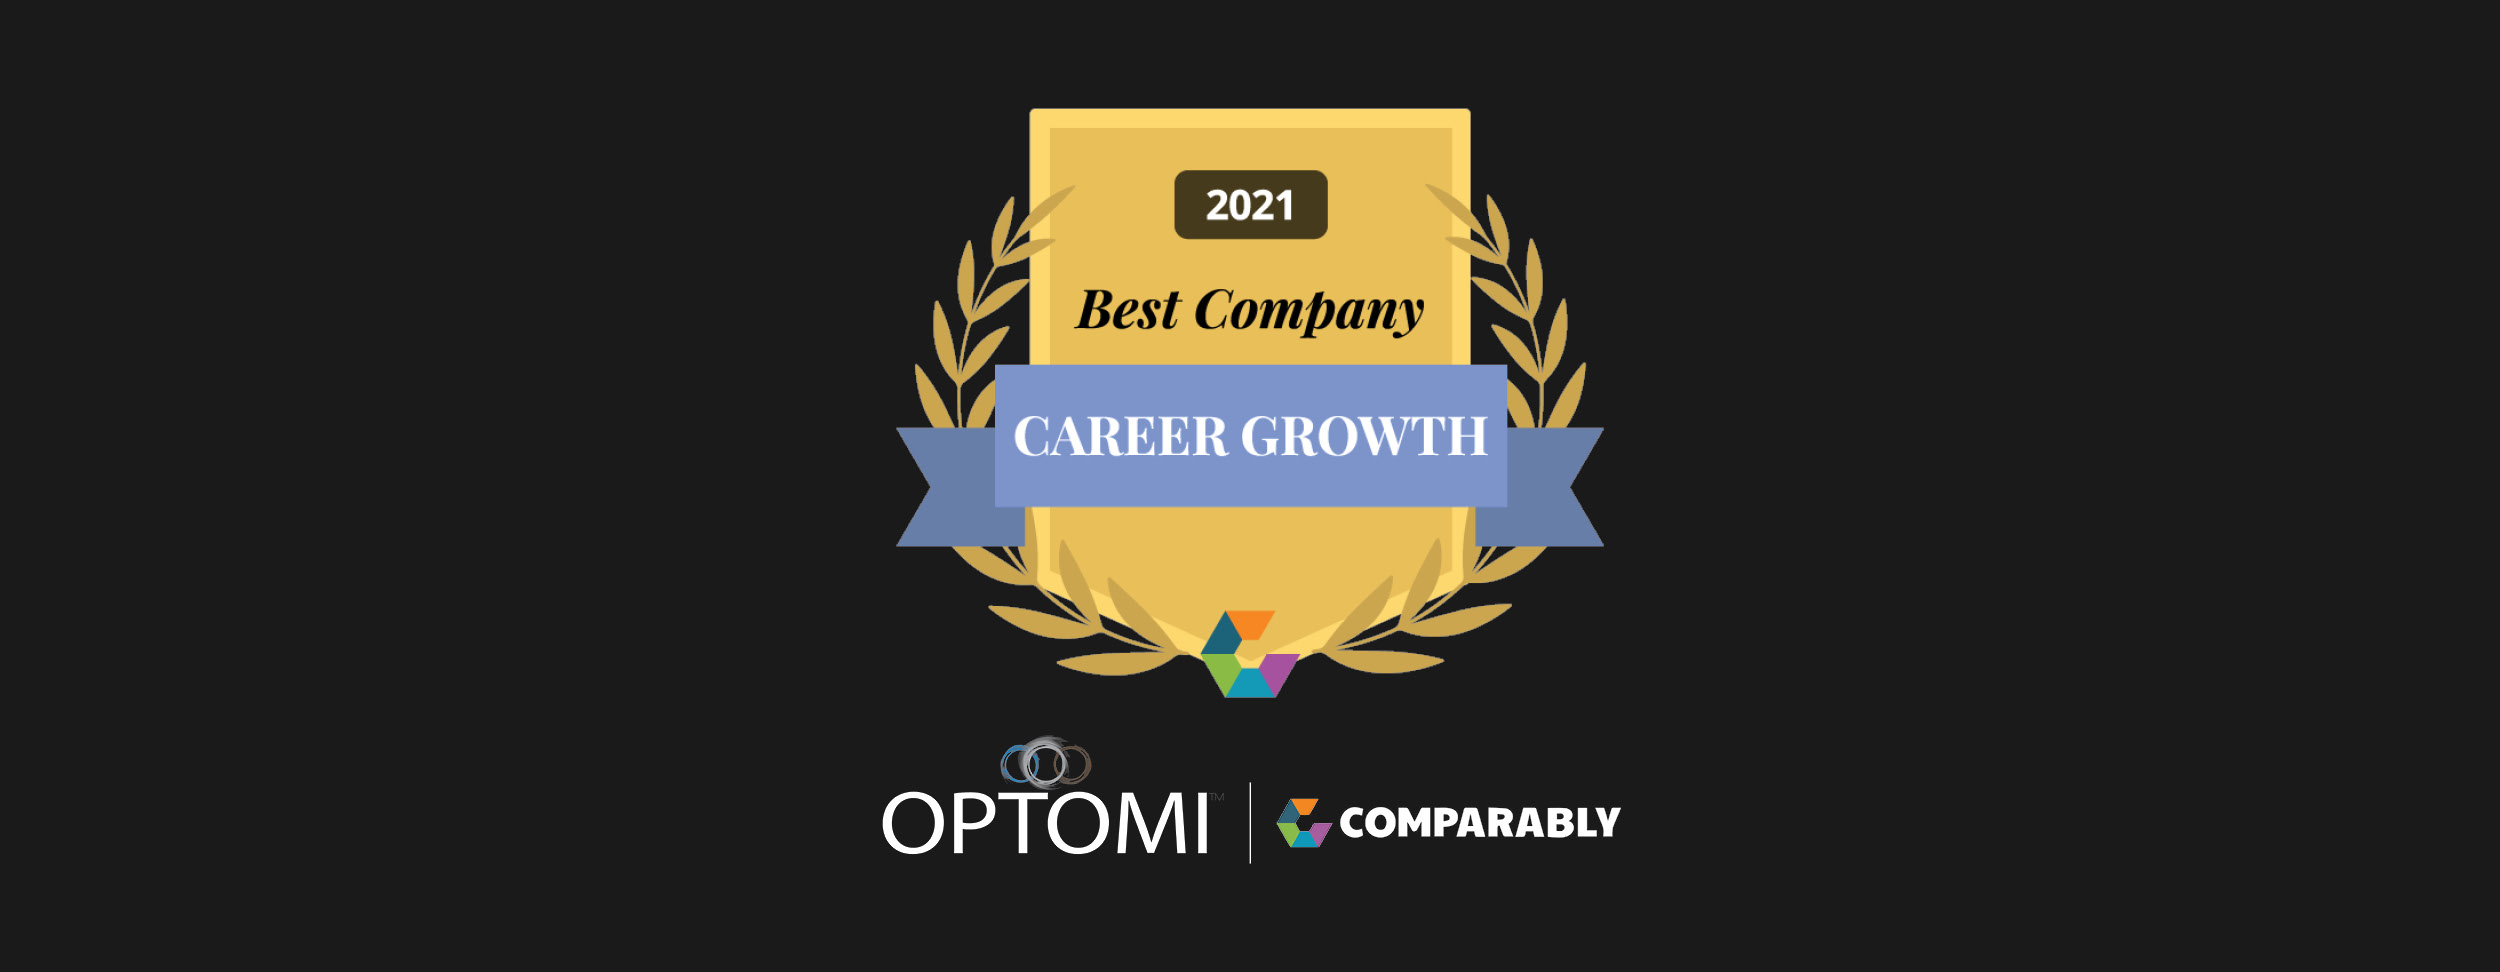 best-opportunity-for-career-growth-optomi-professional-services-comparably